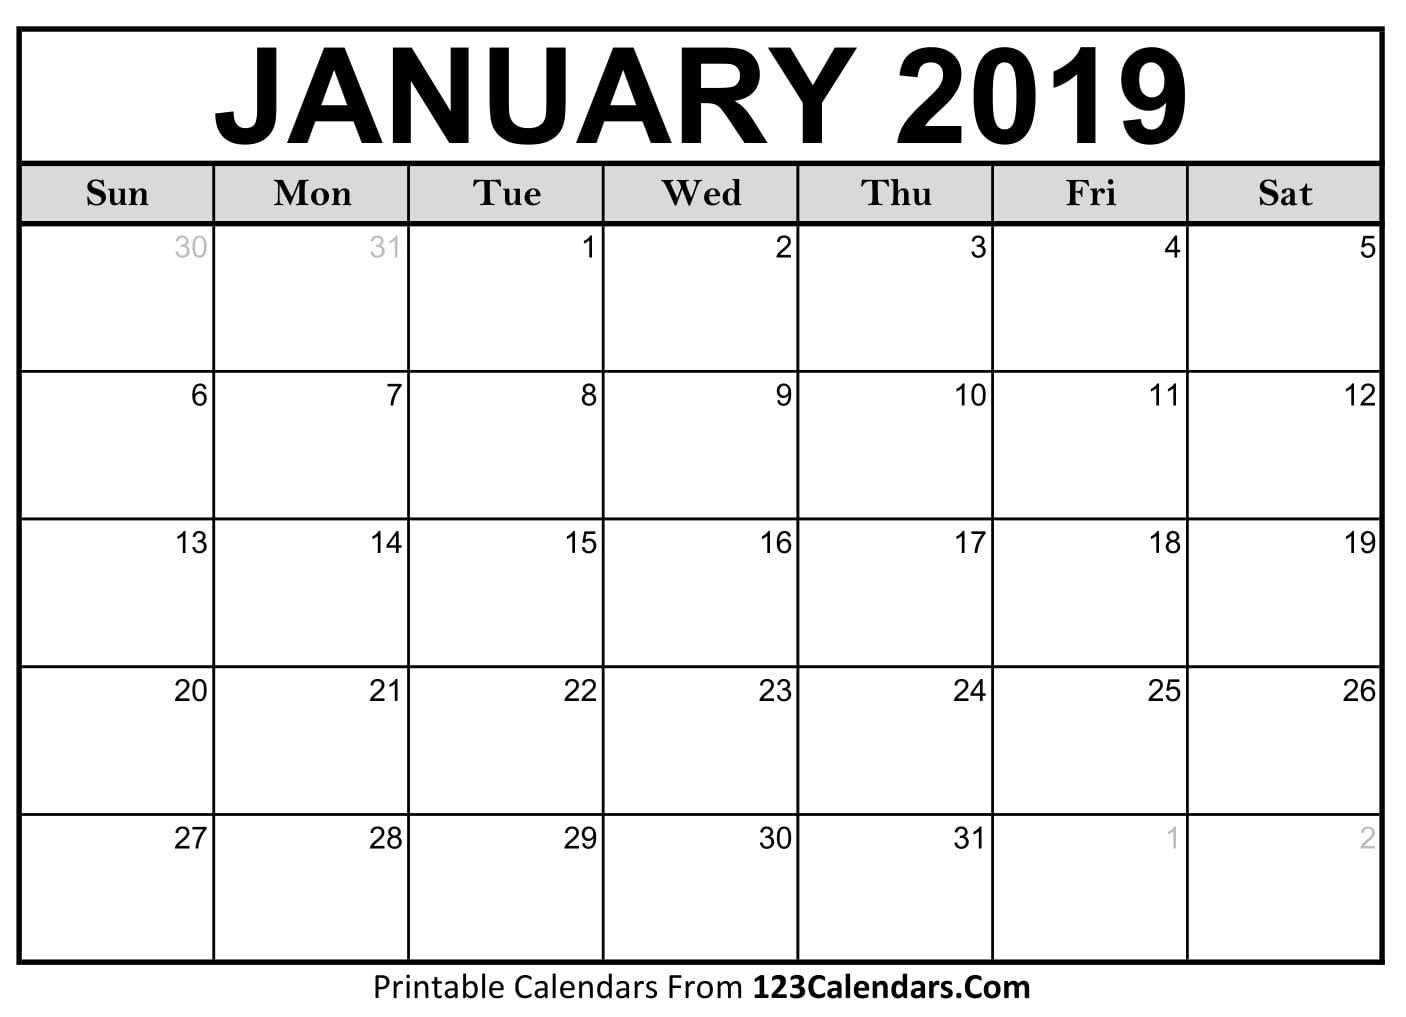 Free Printable Calendar | 123Calendars-2020 Monthly Calendar Printable Showing Previous Month And Next Month